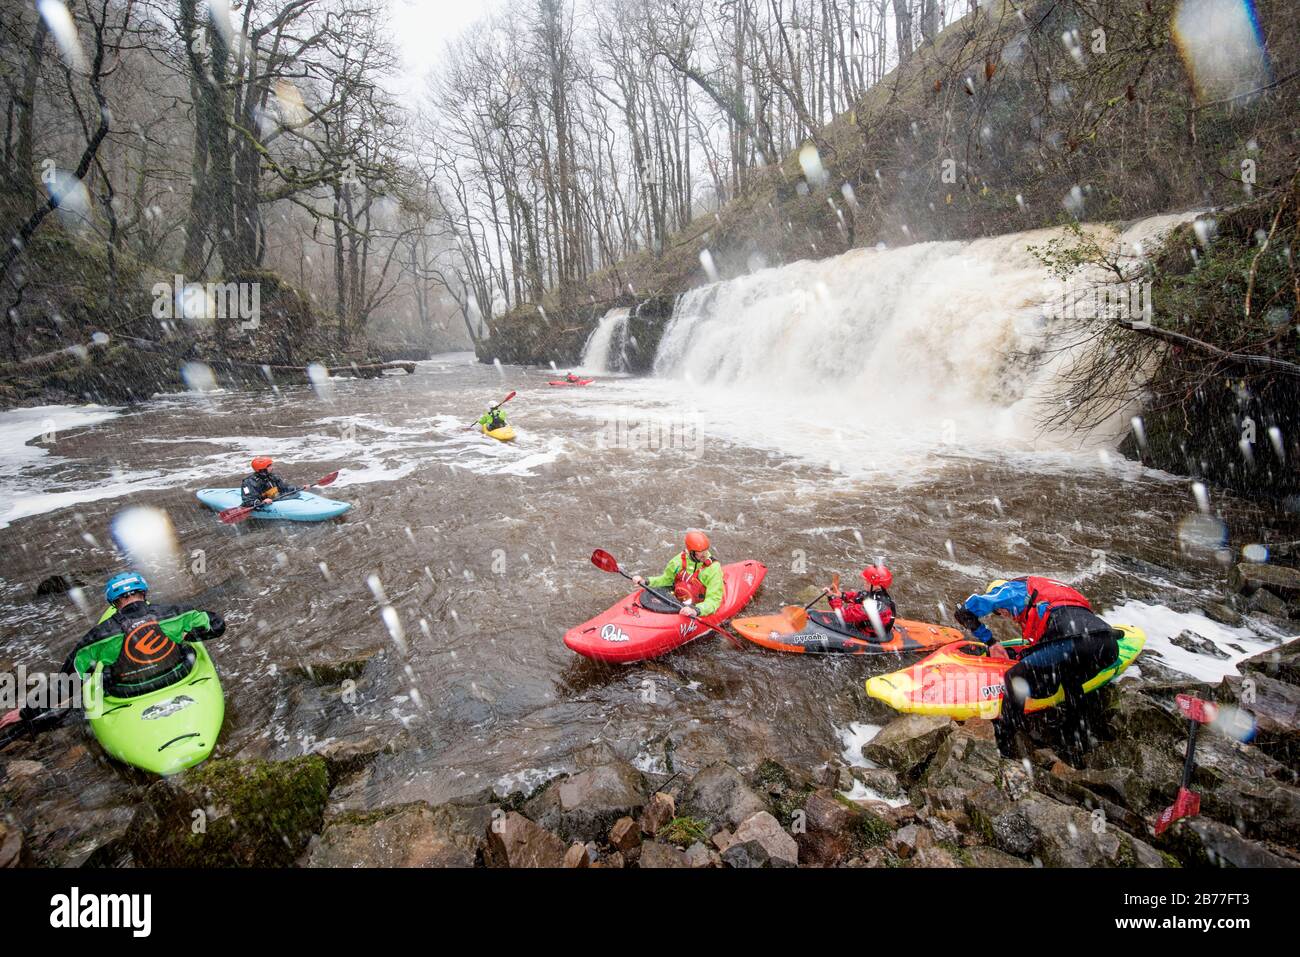 Kayakers rest in the plunge pool after riding the Sgwd y Pannwr falls on the River Mellte near Pontneddfechan in the Brecon Beacons, Wales UK Stock Photo